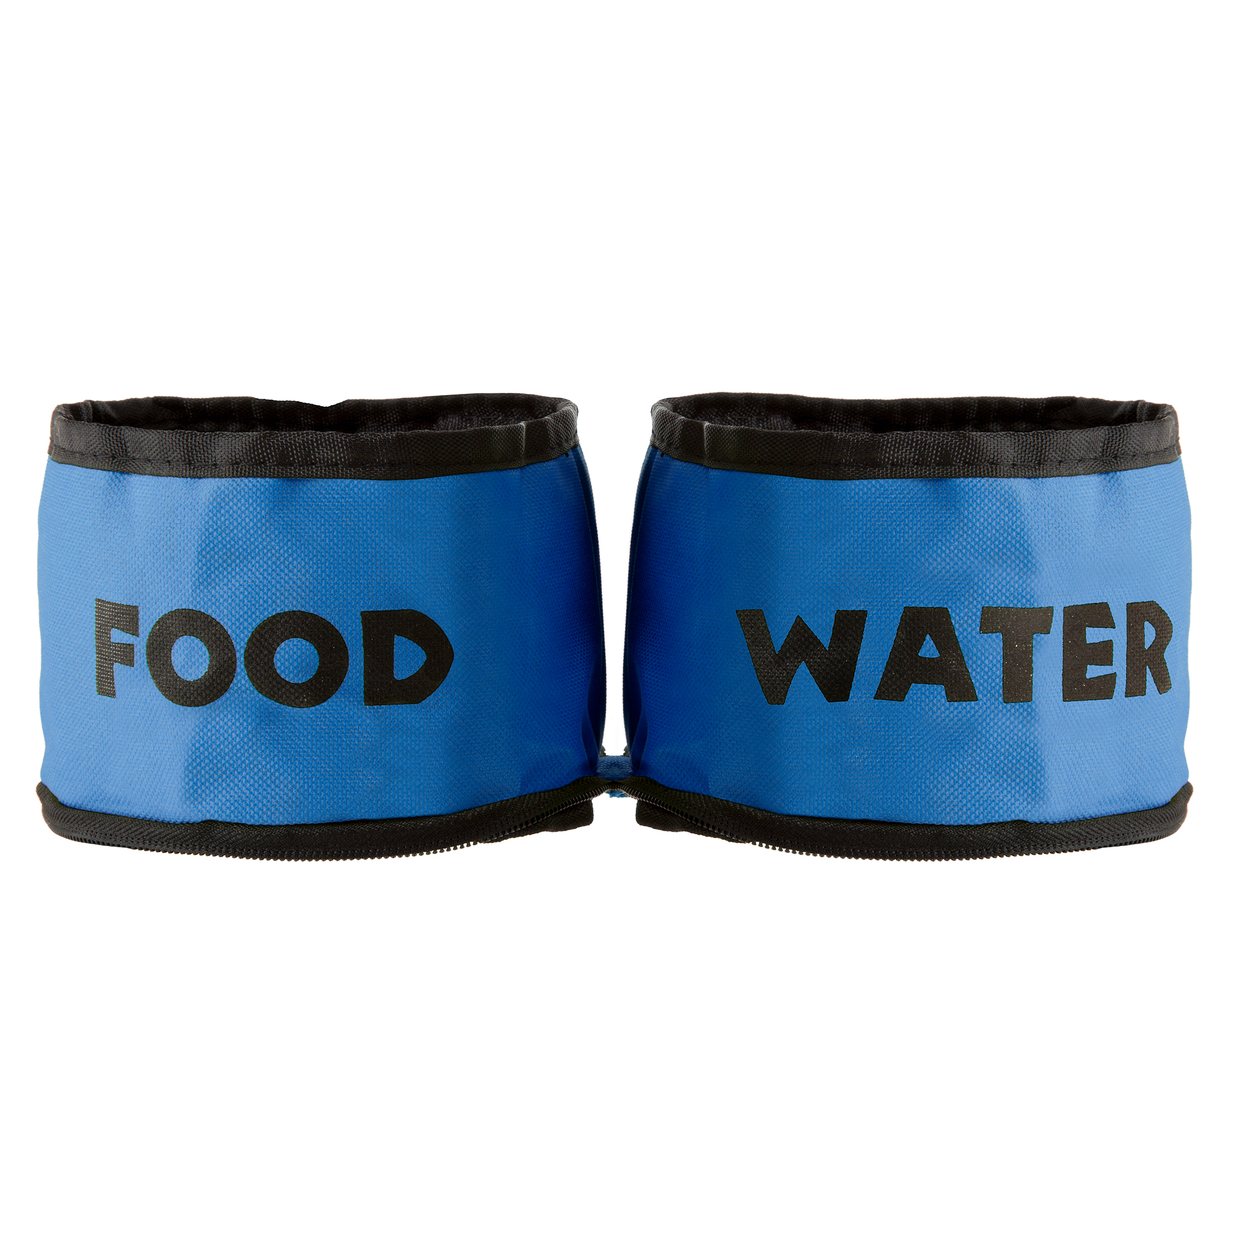 Collapsible Travel Pet Bowls Set Of 2 For Dogs Or Cats, Blue